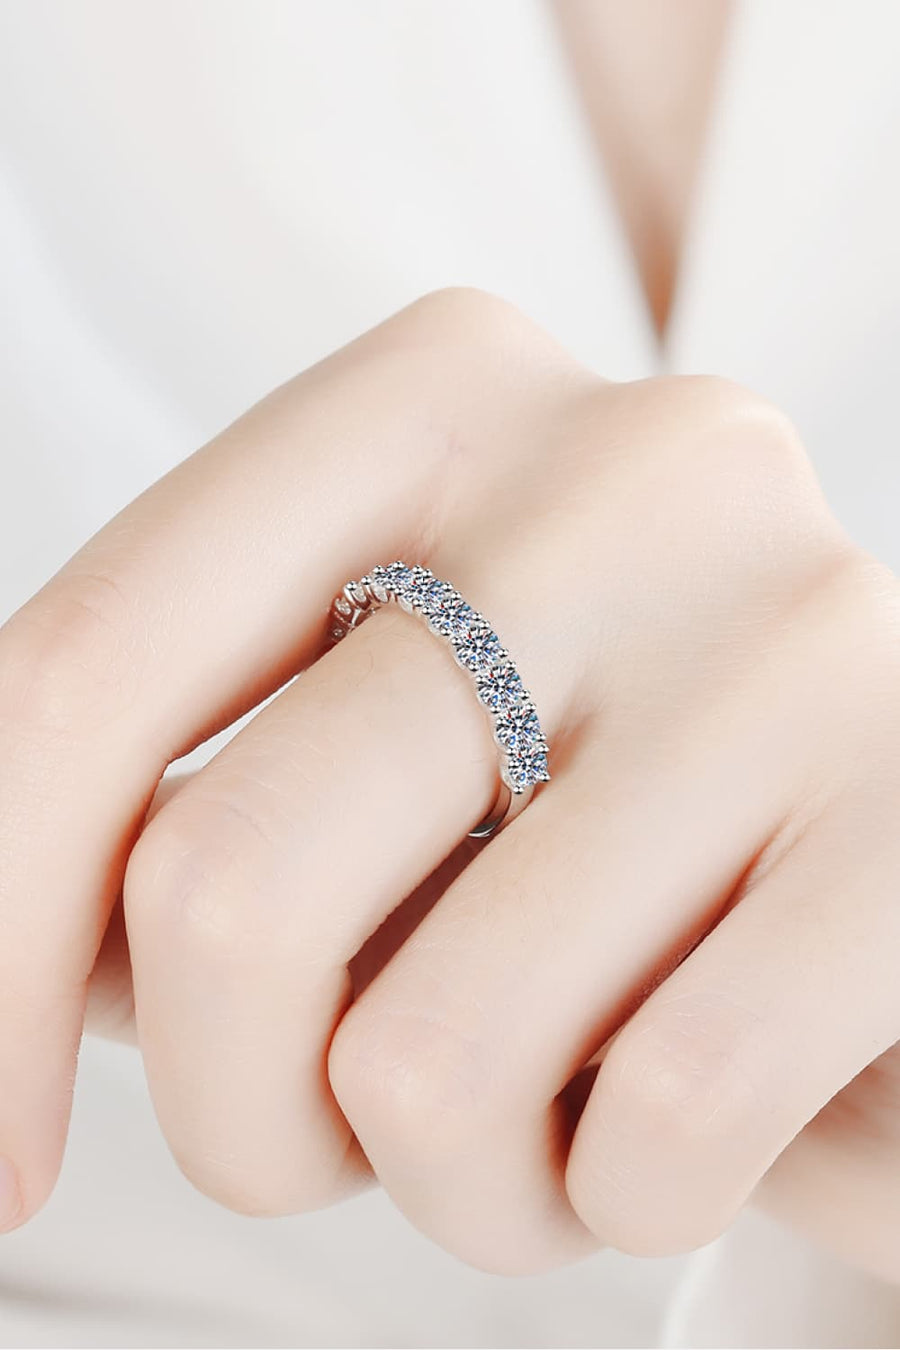 1 Carat Moissanite Ring, Half-Eternity Band, Moissanite Jewelry, Statement Ring, Sterling Silver Ring, Lab-Created Gemstone Ring, Affordable Luxury Jewelry, Eternity Band, Sparkling Moissanite Ring, Fashion Jewelry, Elegant Silver Ring, Modern Jewelry, Gift for Her, Special Occasion Ring, Alternative Engagement Ring